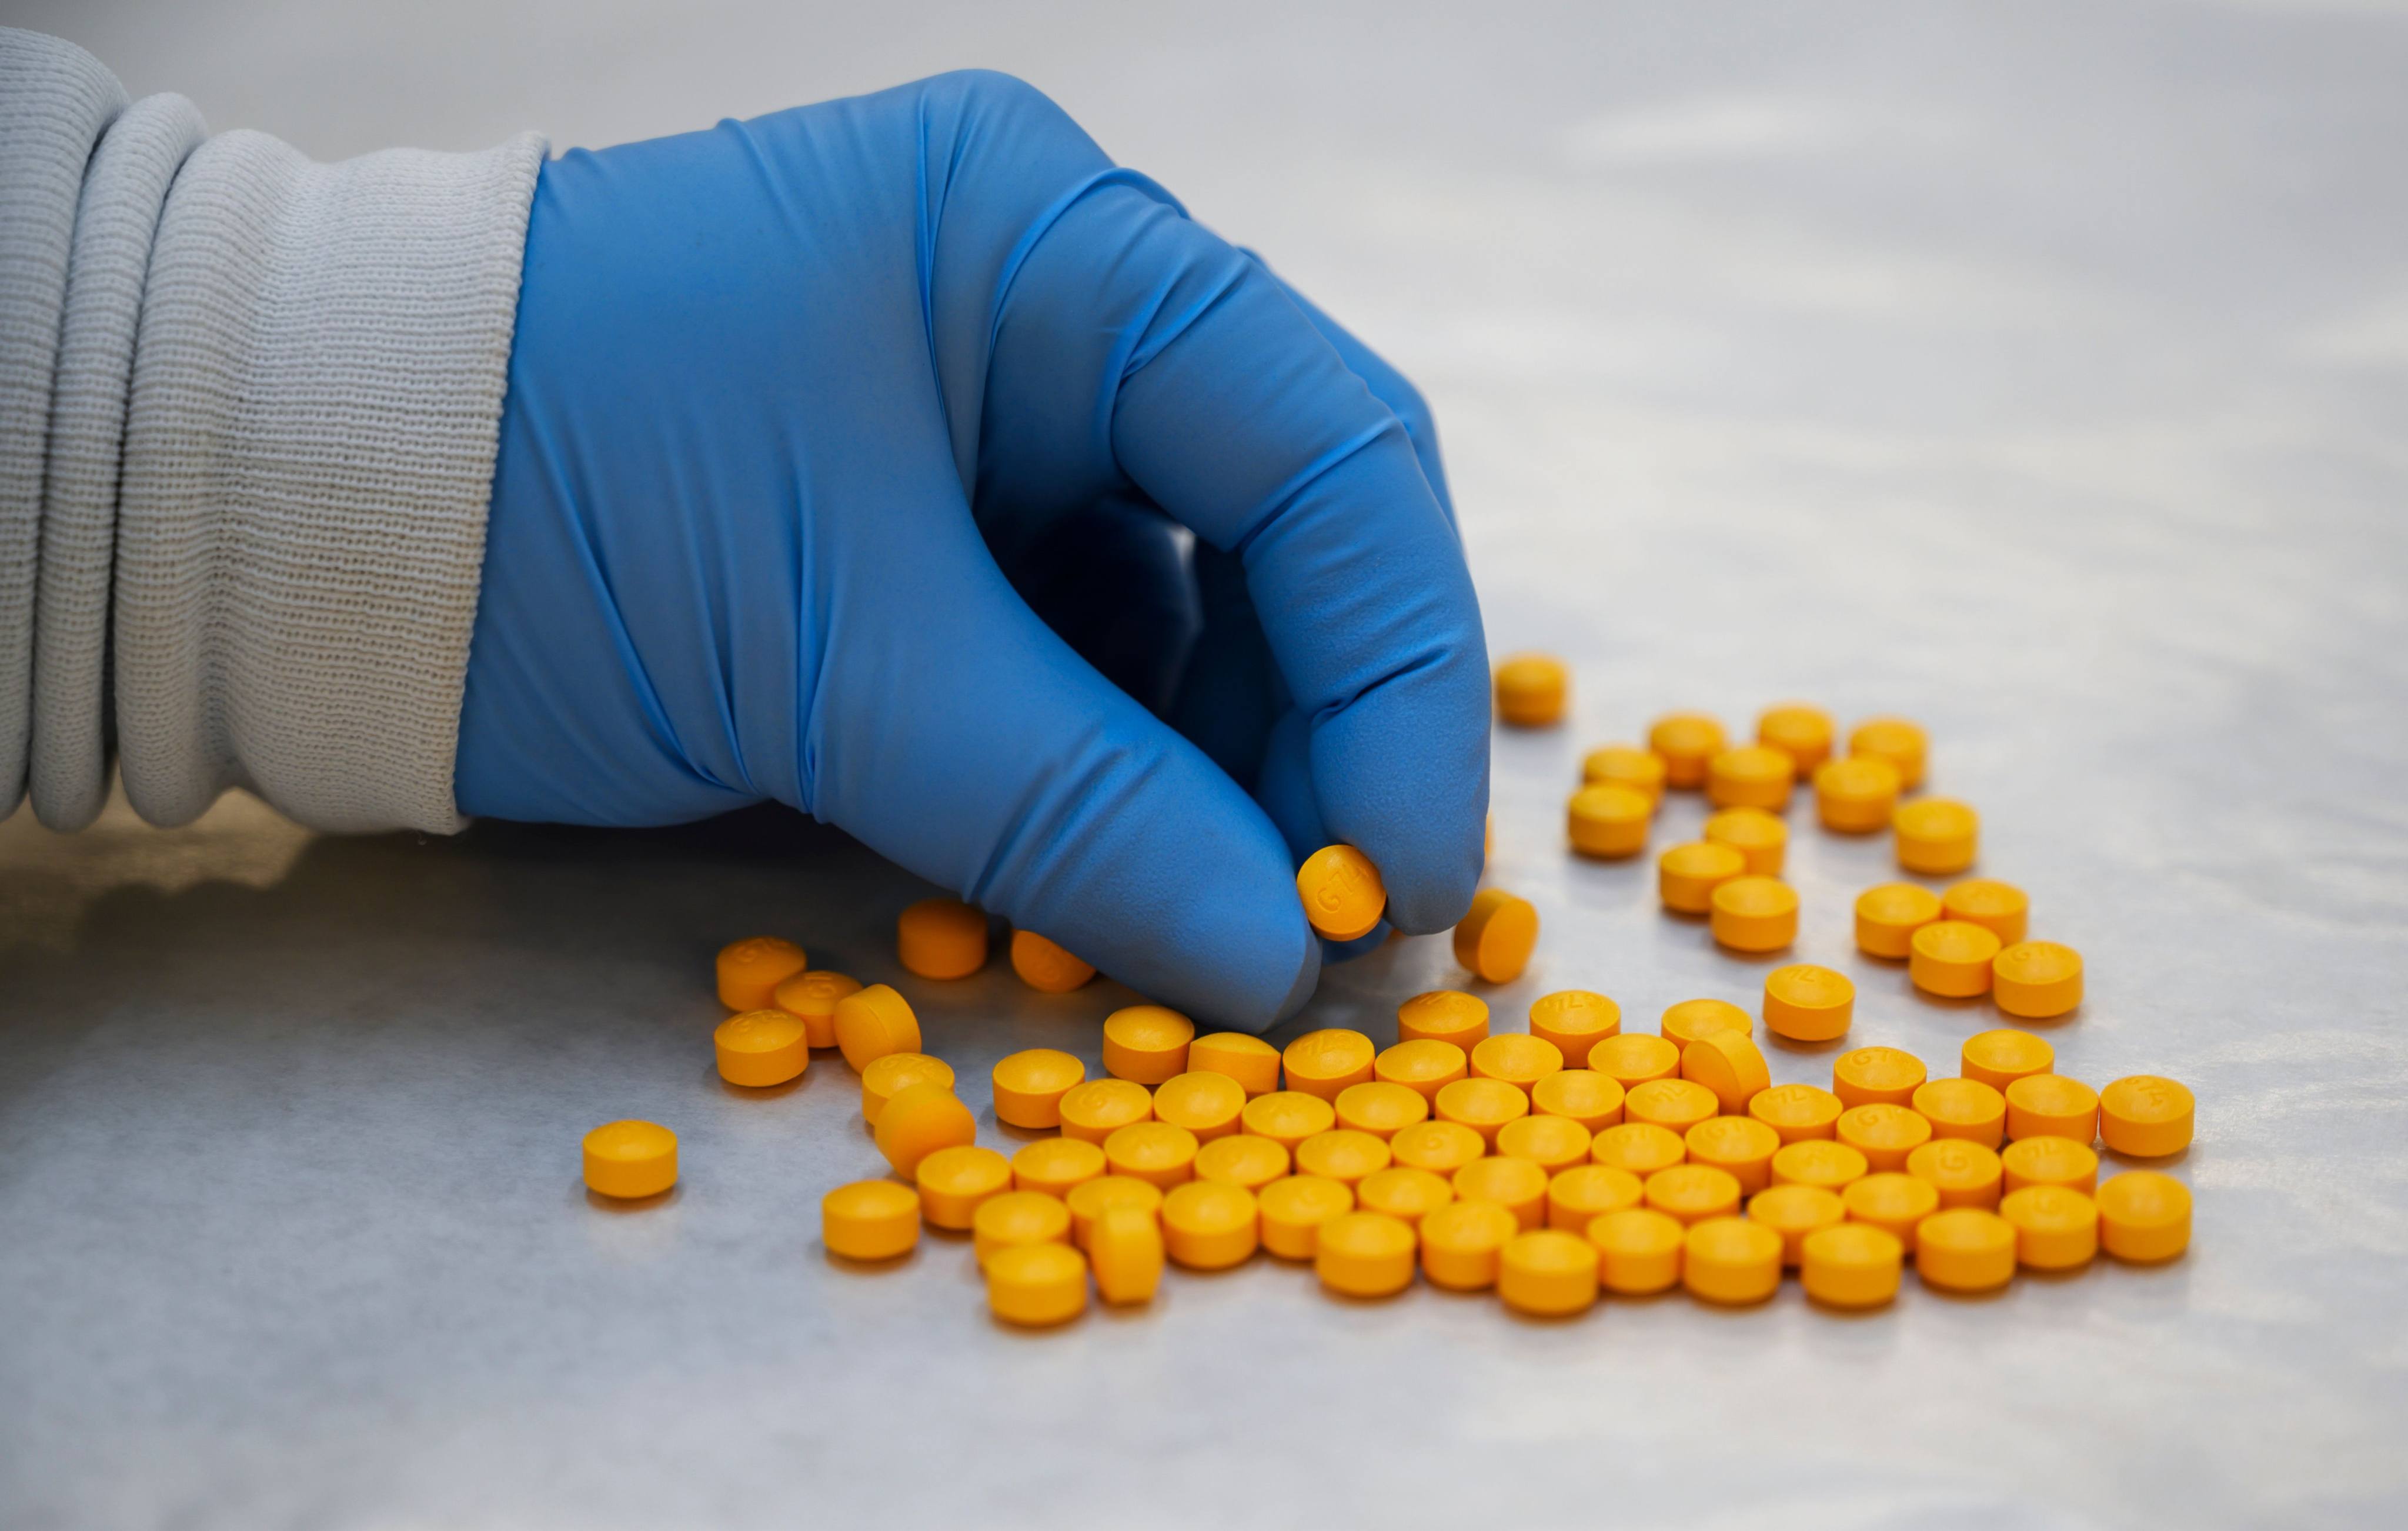 US President Joe Biden’s administration has made the fight against fentanyl a priority, with the synthetic opioid blamed for tens of thousands of deaths in recent years. Photo: TNS